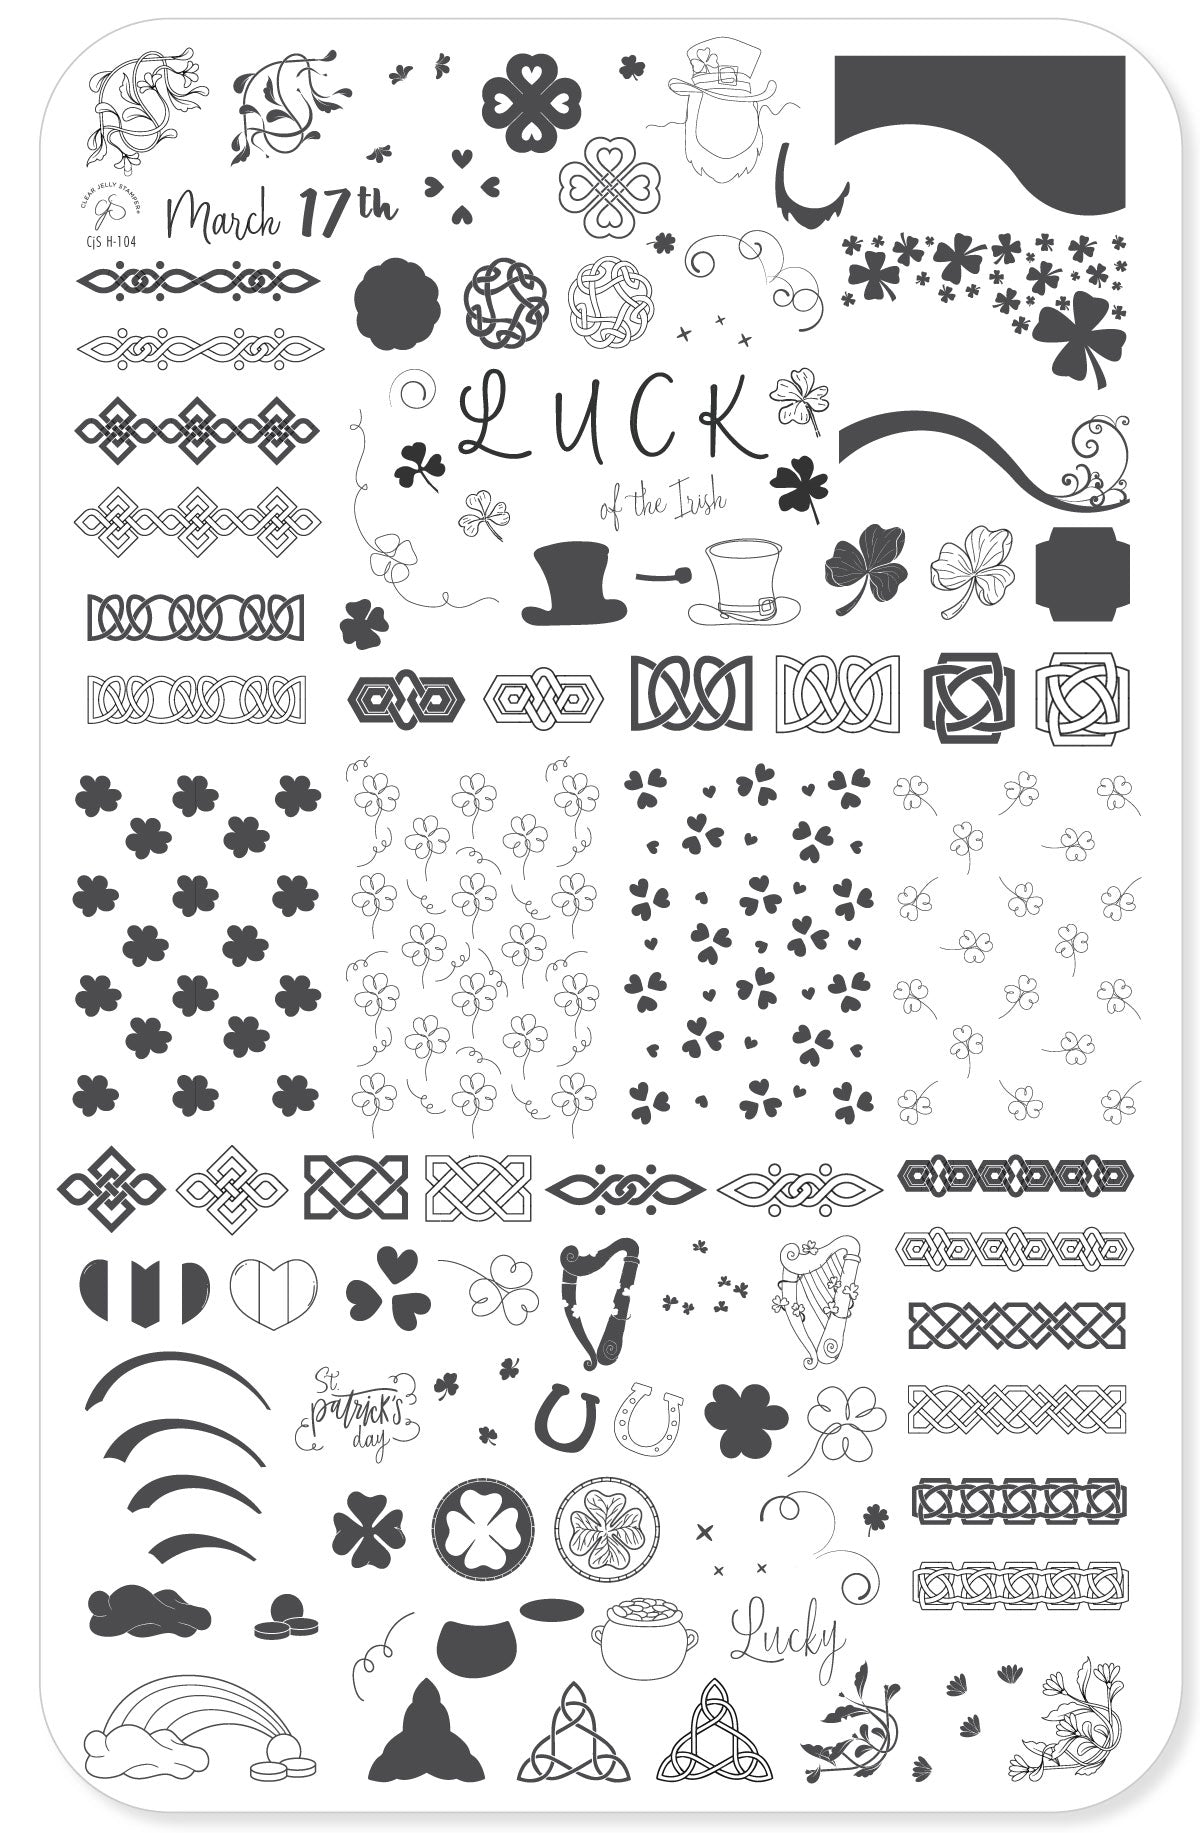 
                  
                    CjSH-104 Luck |  Steel Nail Art Stamping Plate
                  
                